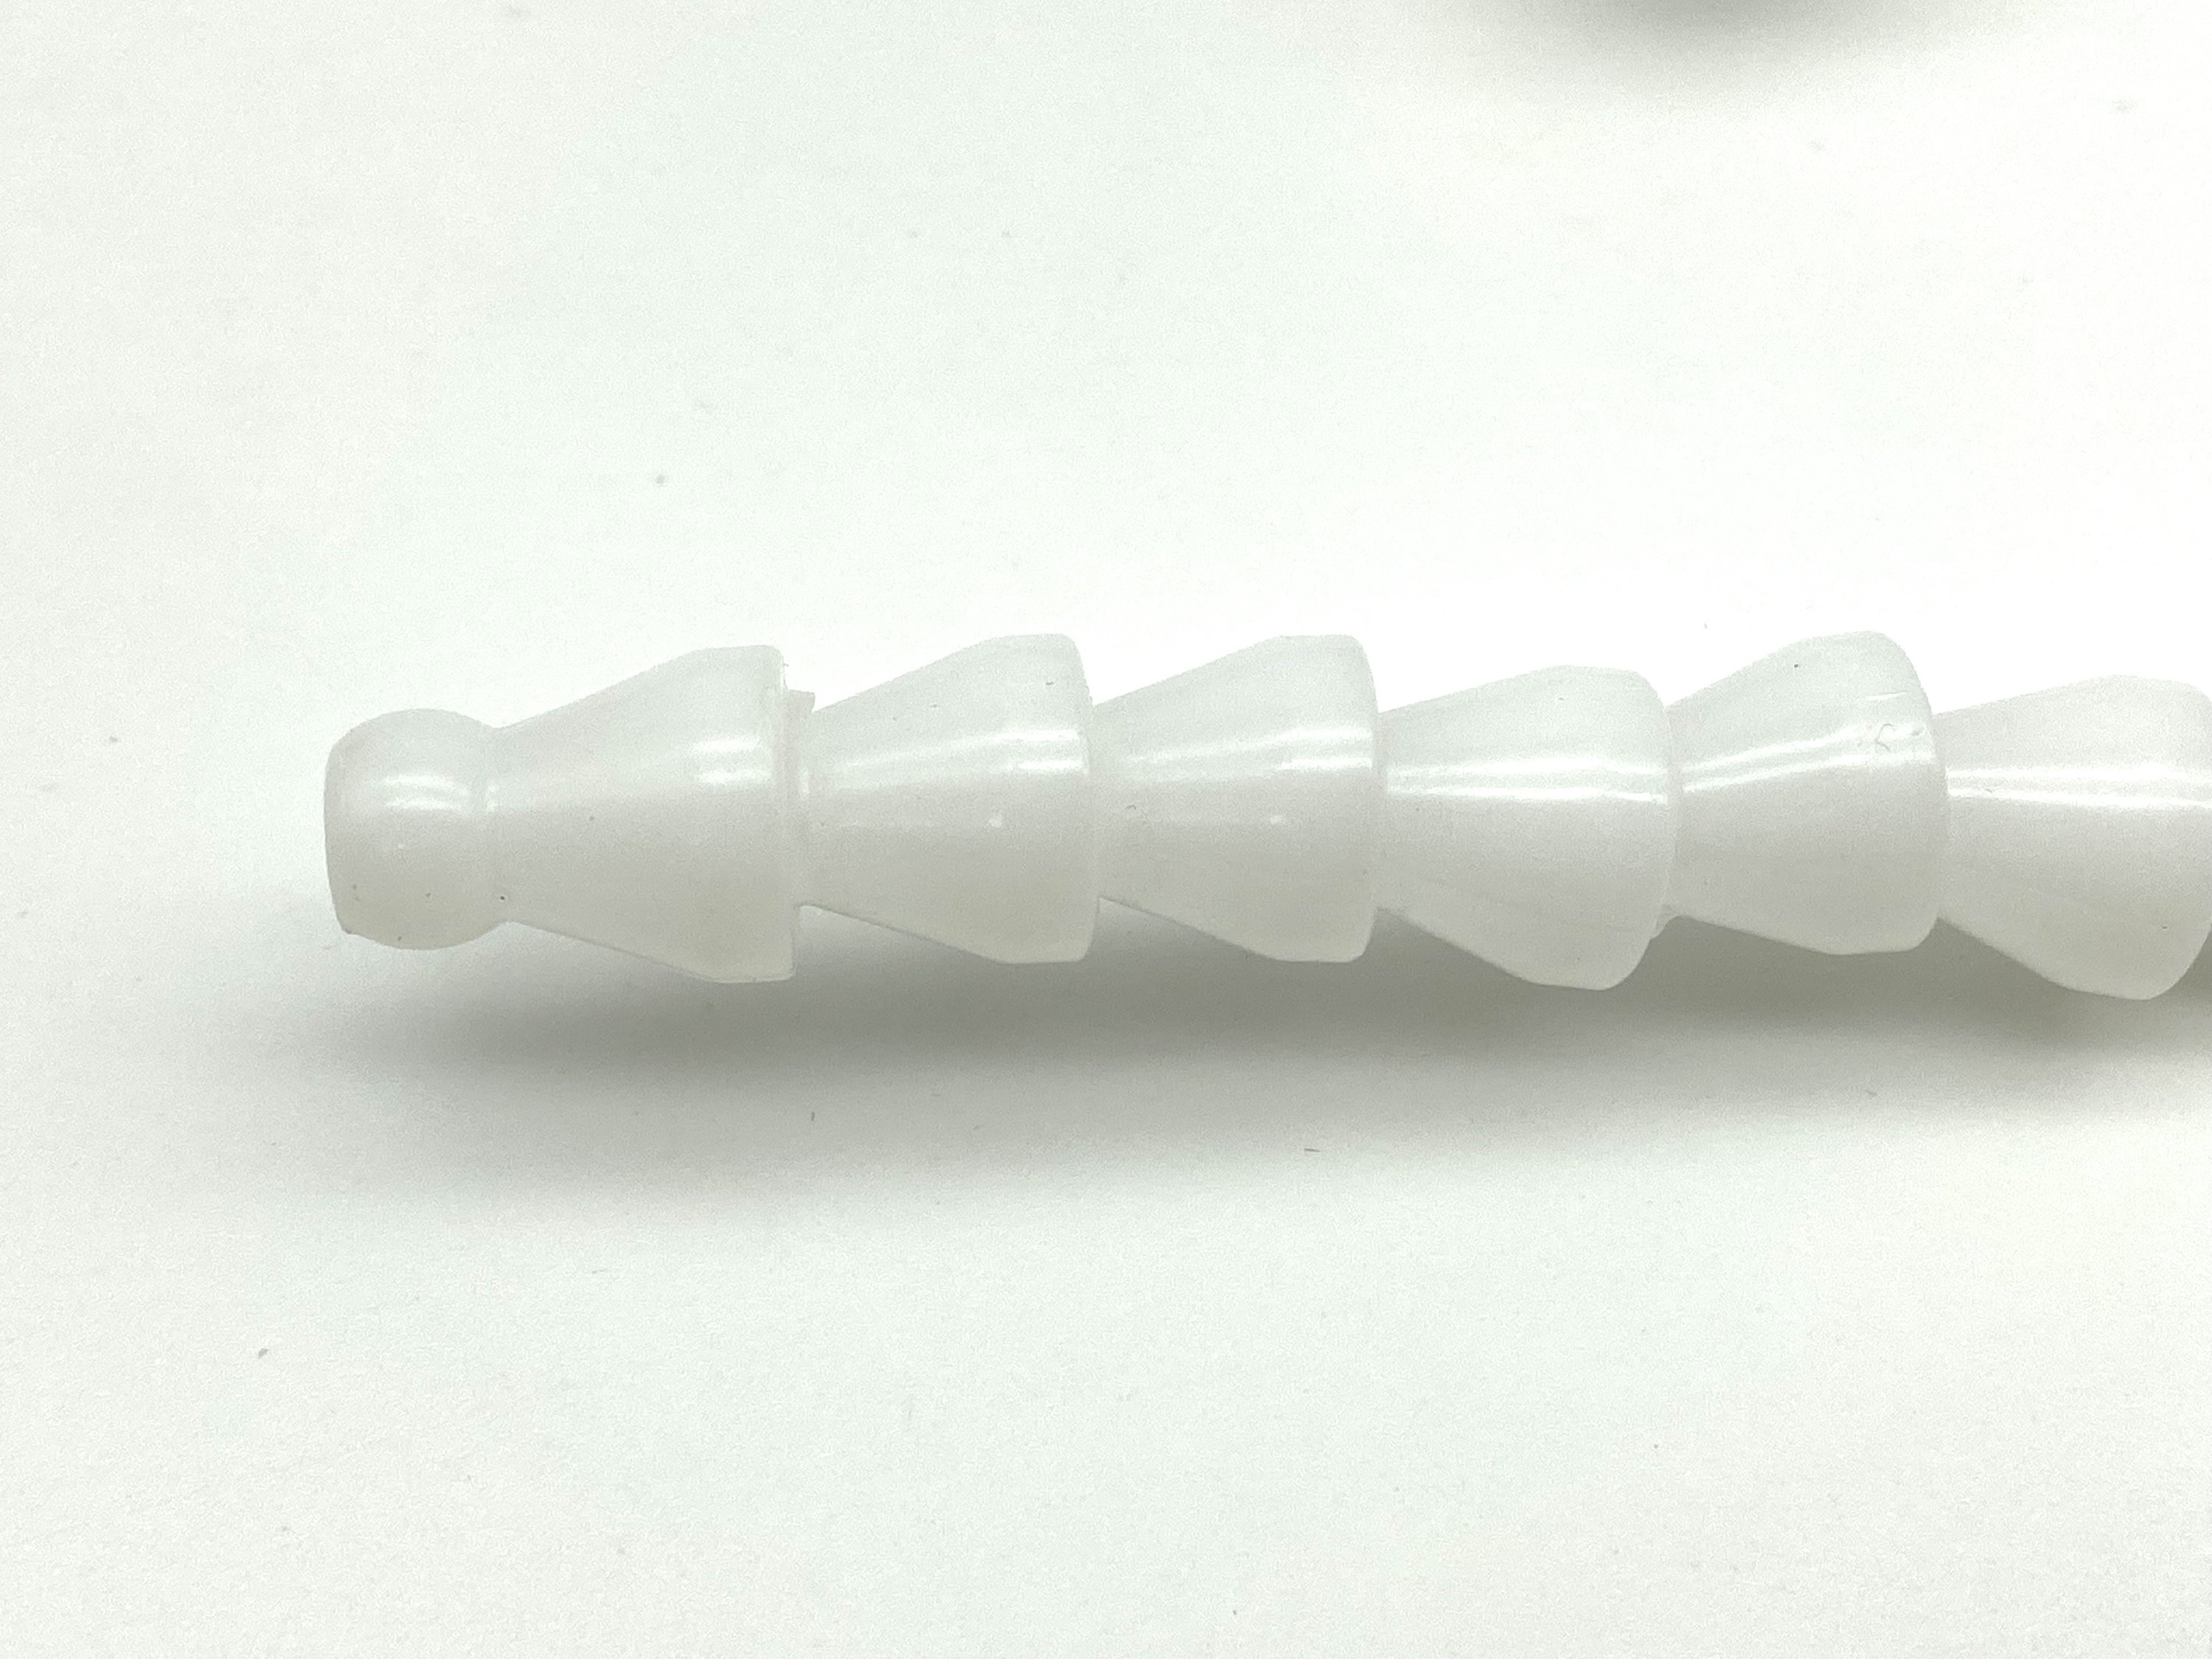 Plastic Doll Armature 1 ft Coil, 1' x 1/8'' Diameter, White, Craft Supplies, Doll Making Supplies from Factory Direct Craft